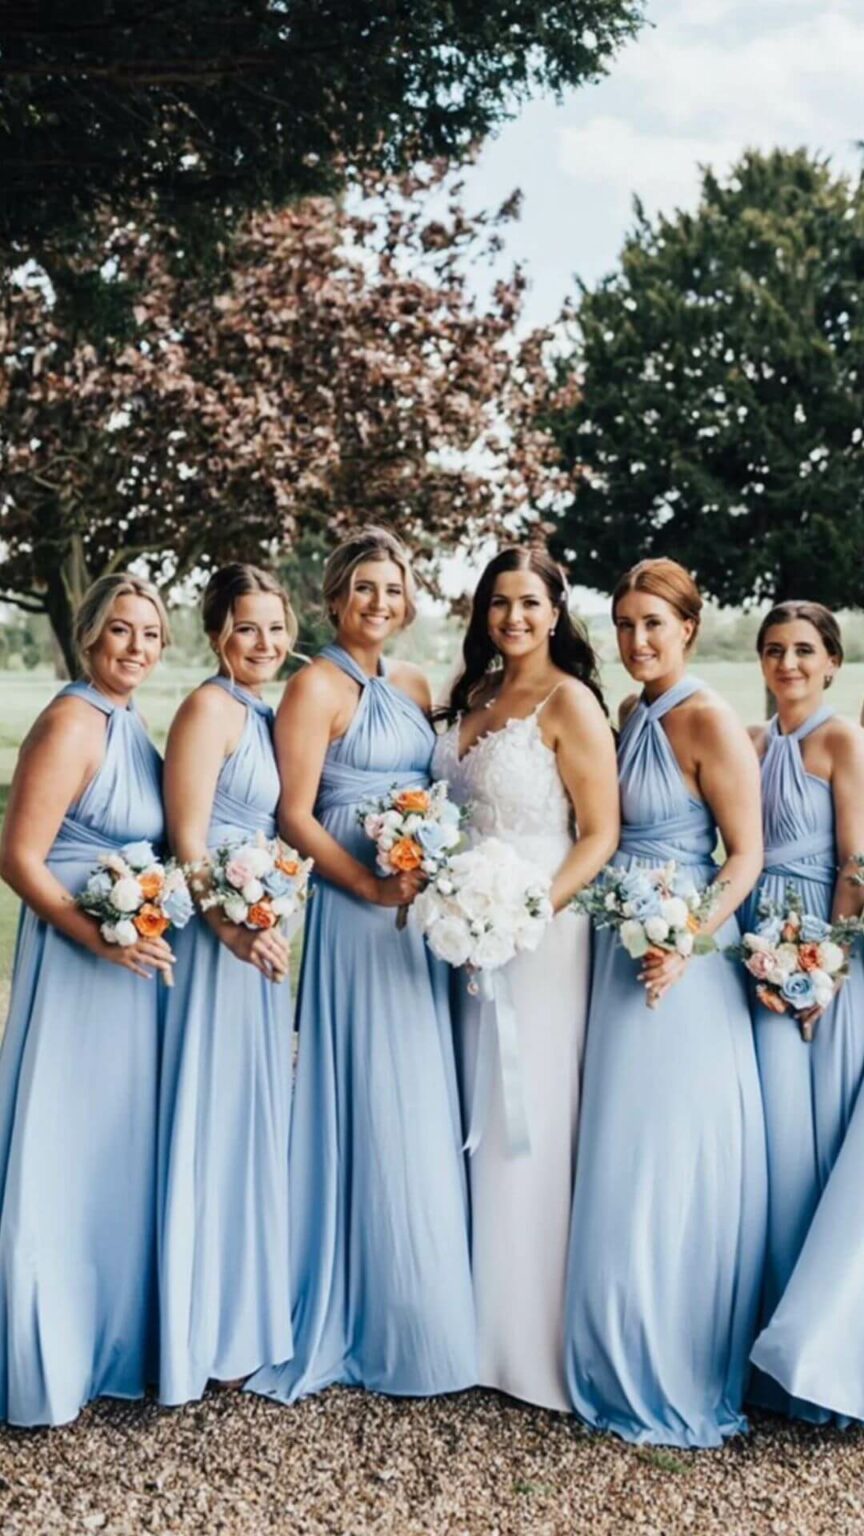 Elegant And Comfortable This Long Dusty Blue Bridesmaid Dress Is Fashioned From A Stretchy Jersey Fabric That Flows Freely At The Waist. 1 864x1536 